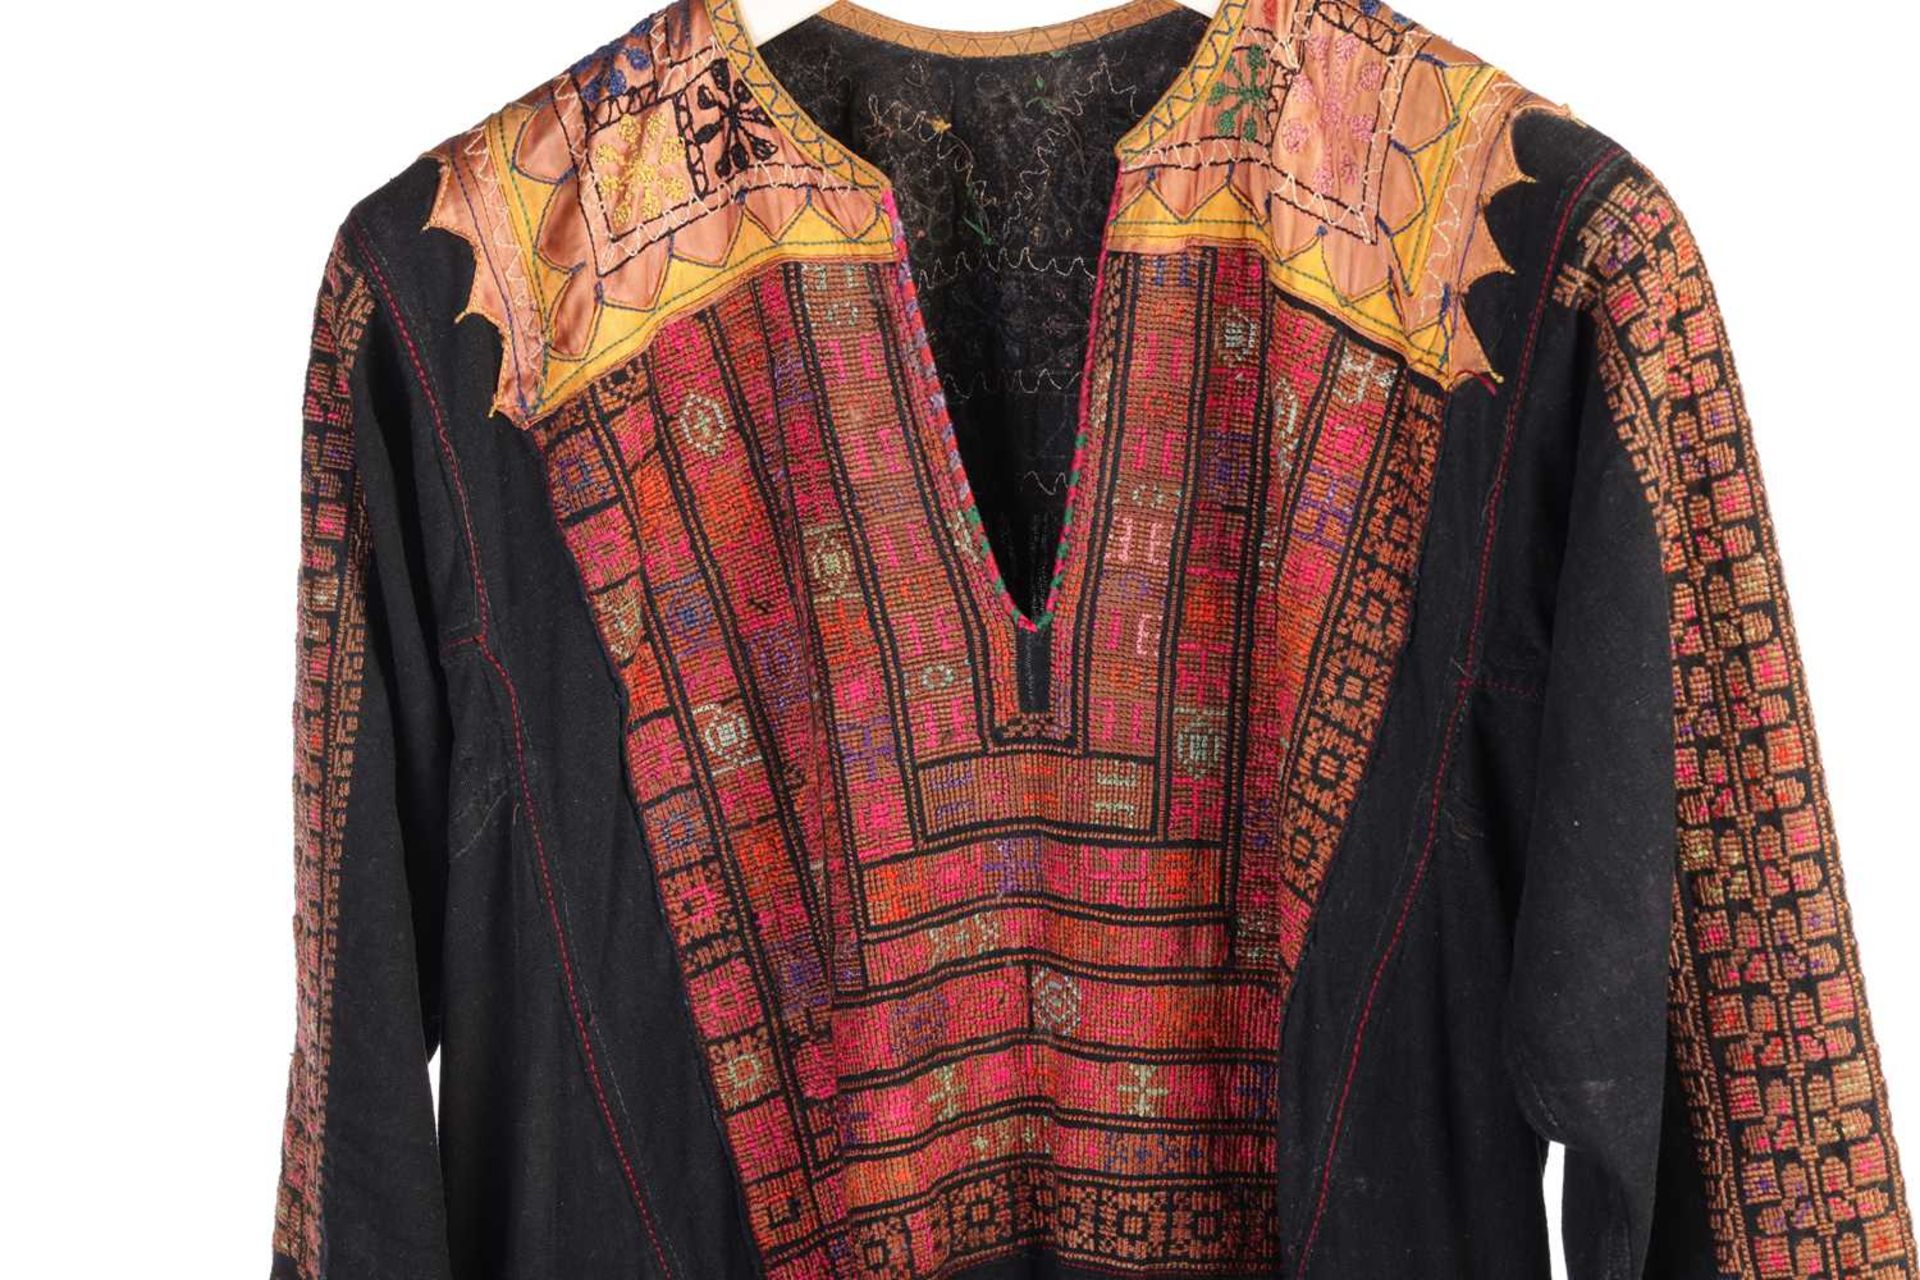 A Palestinian/Jordanian (?) lady's Thobe dress, with satin embellished shoulders and panels of geome - Bild 5 aus 10